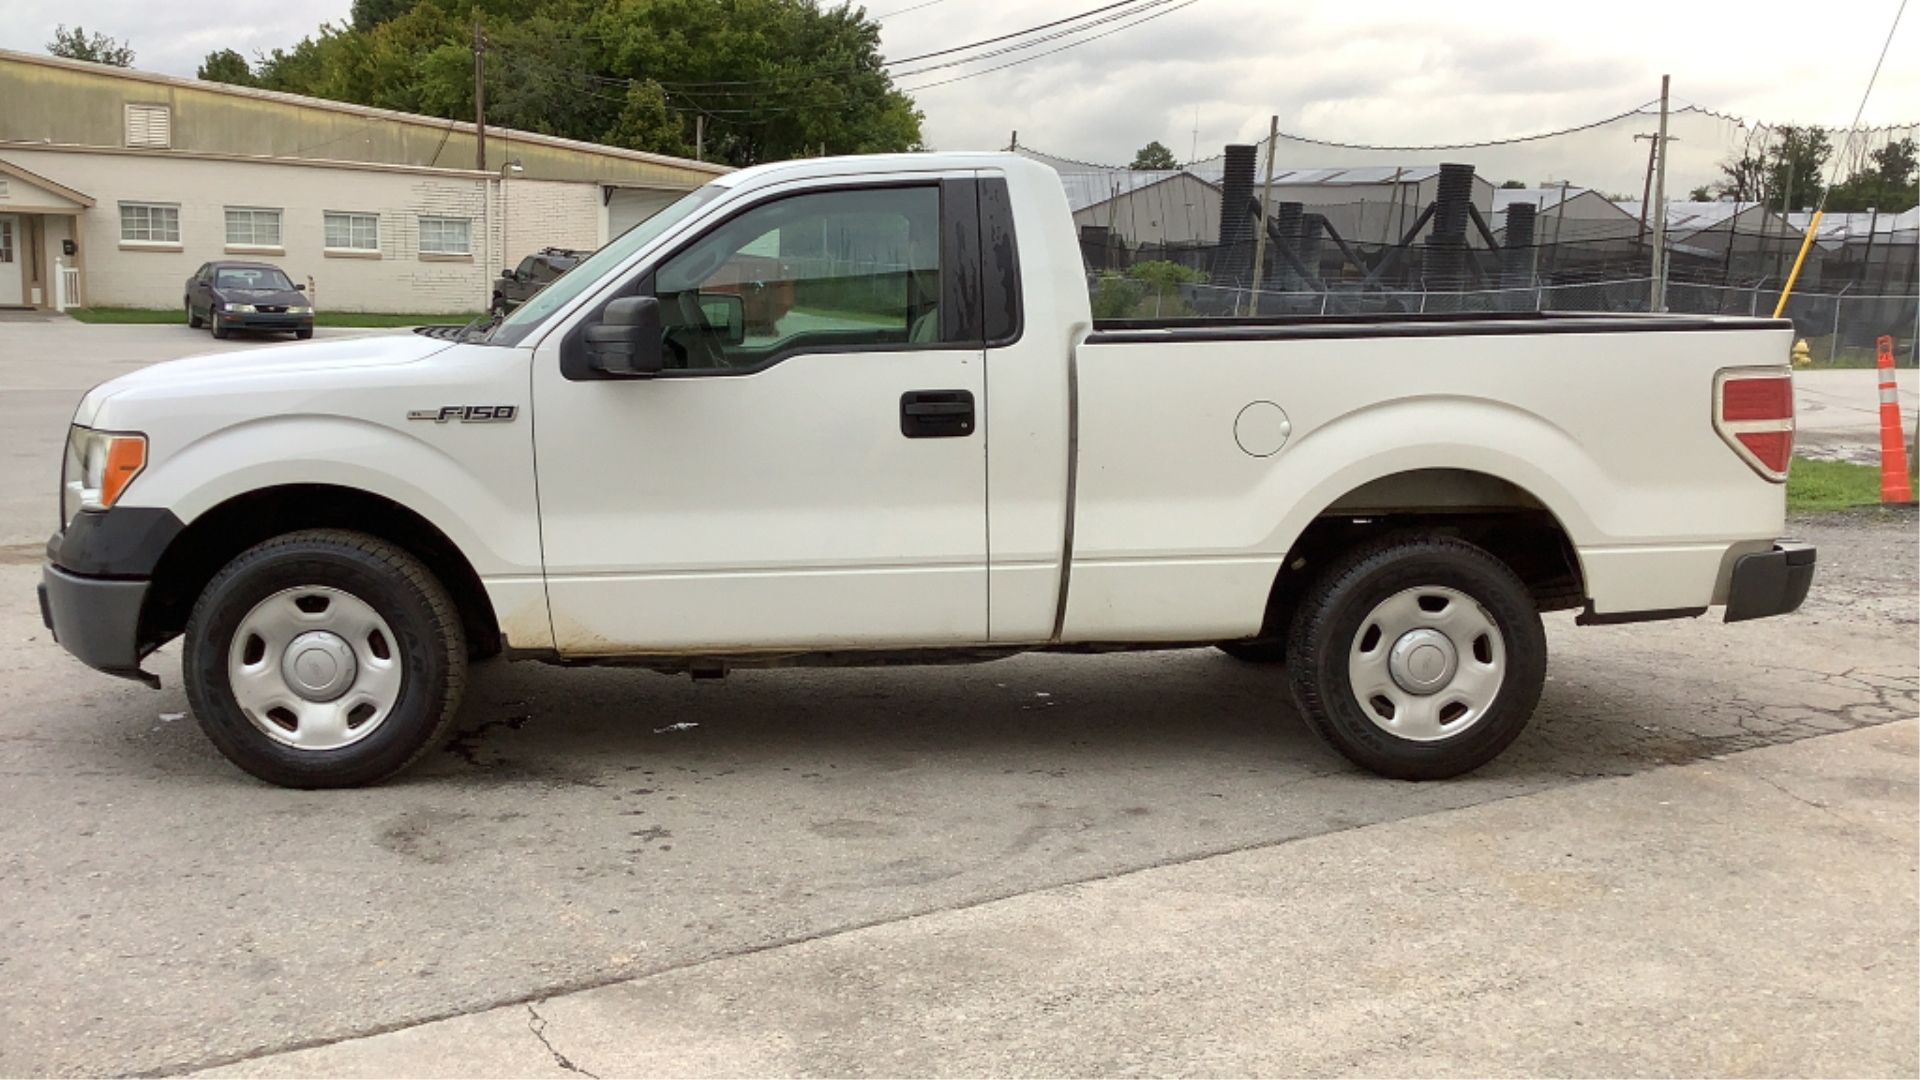 2009 Ford F-150 Regular Cab XL 2WD - Image 9 of 71